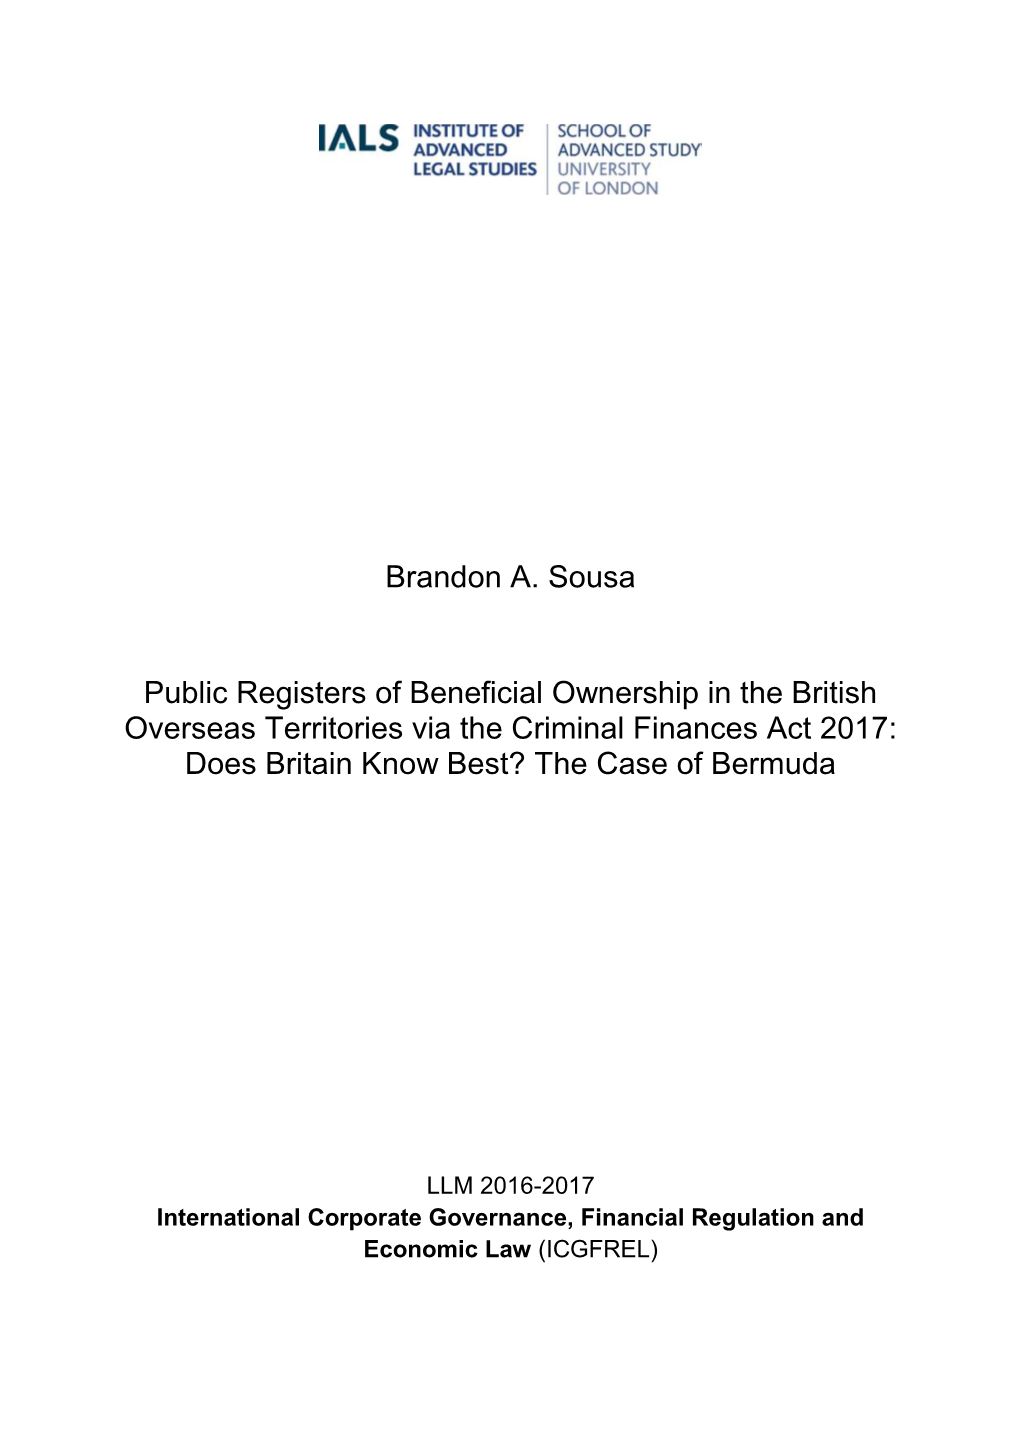 Brandon A. Sousa Public Registers of Beneficial Ownership in the British